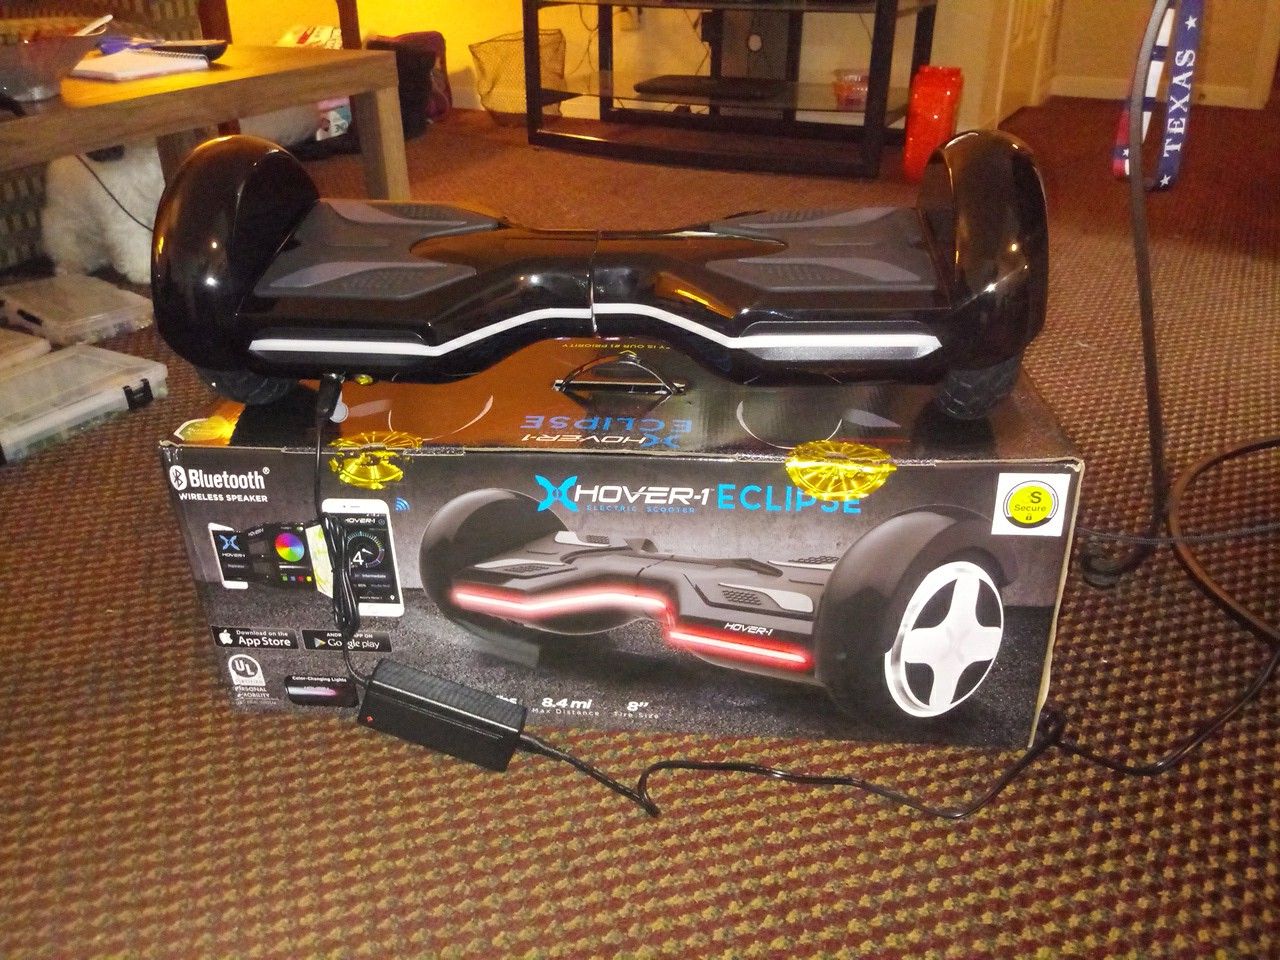 Hover 1 eclips brand new